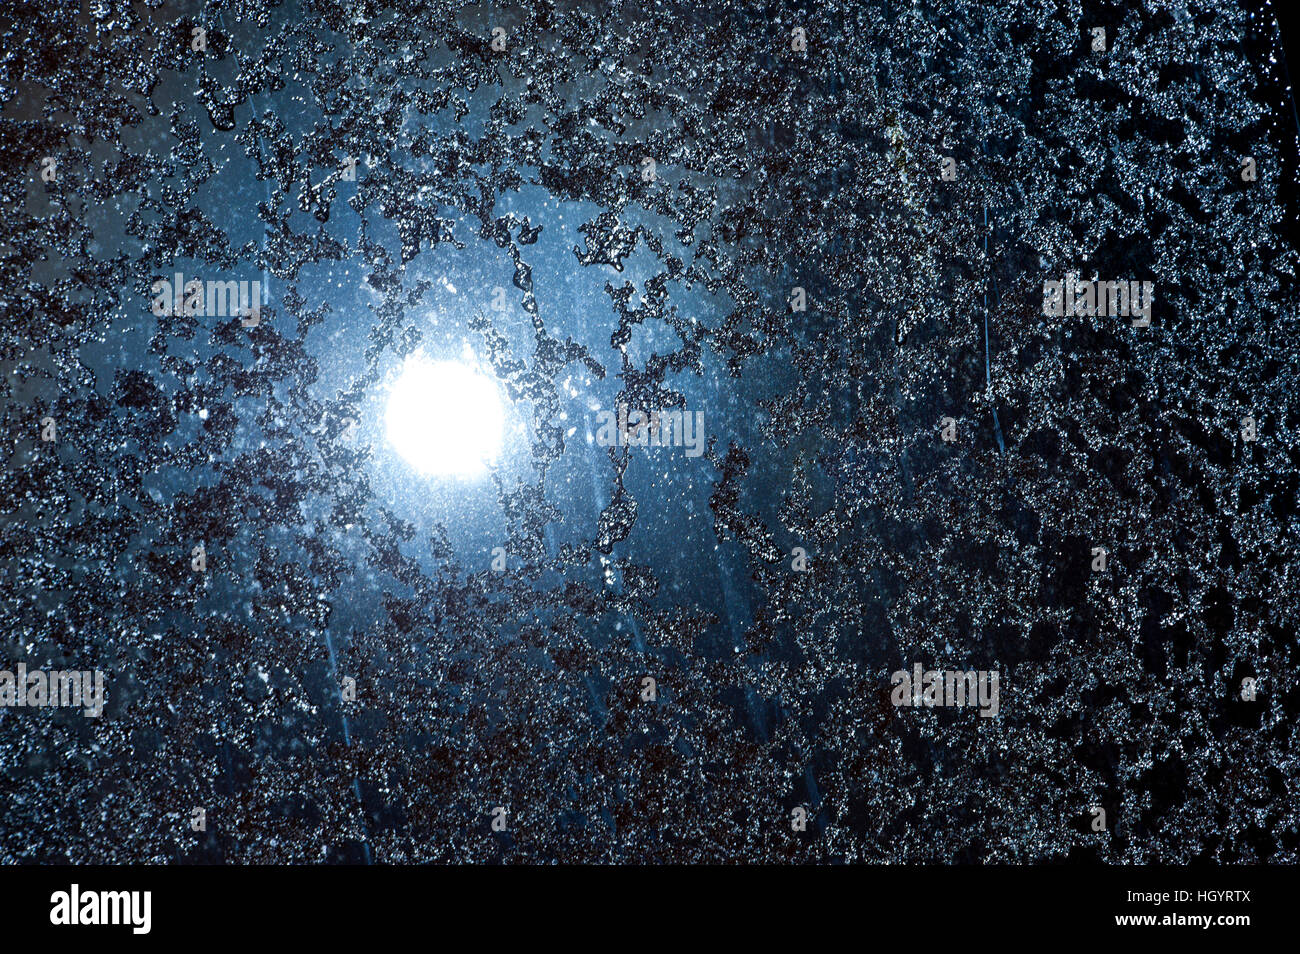 Builth Wells, UK. 14th January, 2017. A waning gibbous Wolf Moon - the January moon also known as the Old Moon -  is seen just after midnight shining eerily through icy snowflakes on a roof skylight in Builth Wells, UK. © Graham M. Lawrence/Alamy Live News Stock Photo